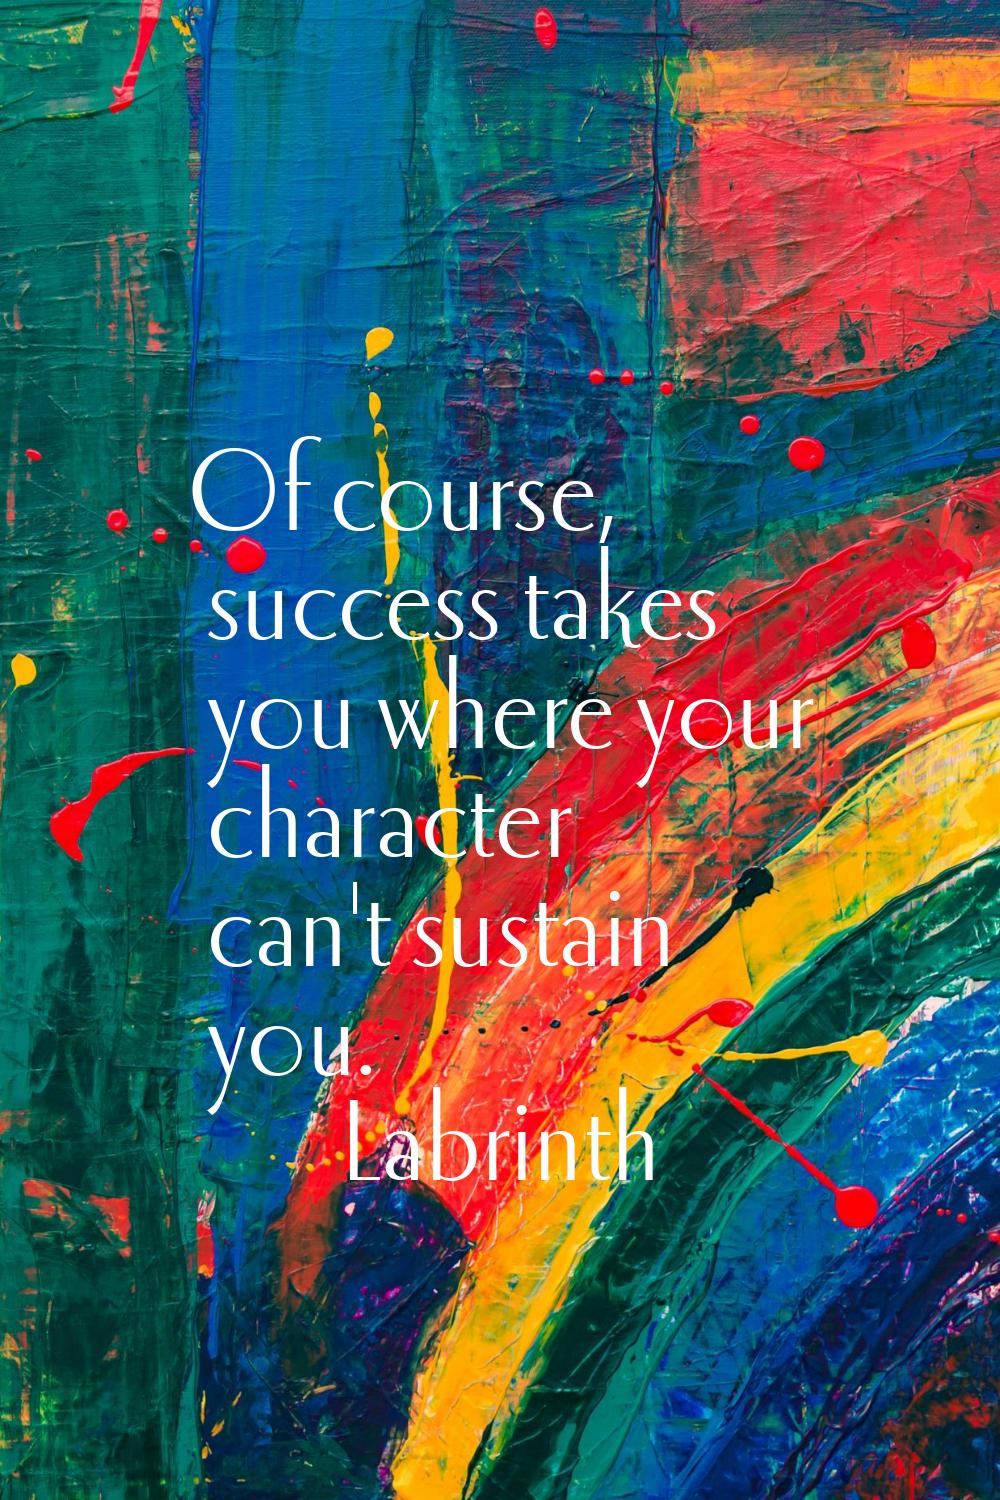 Of course, success takes you where your character can't sustain you.